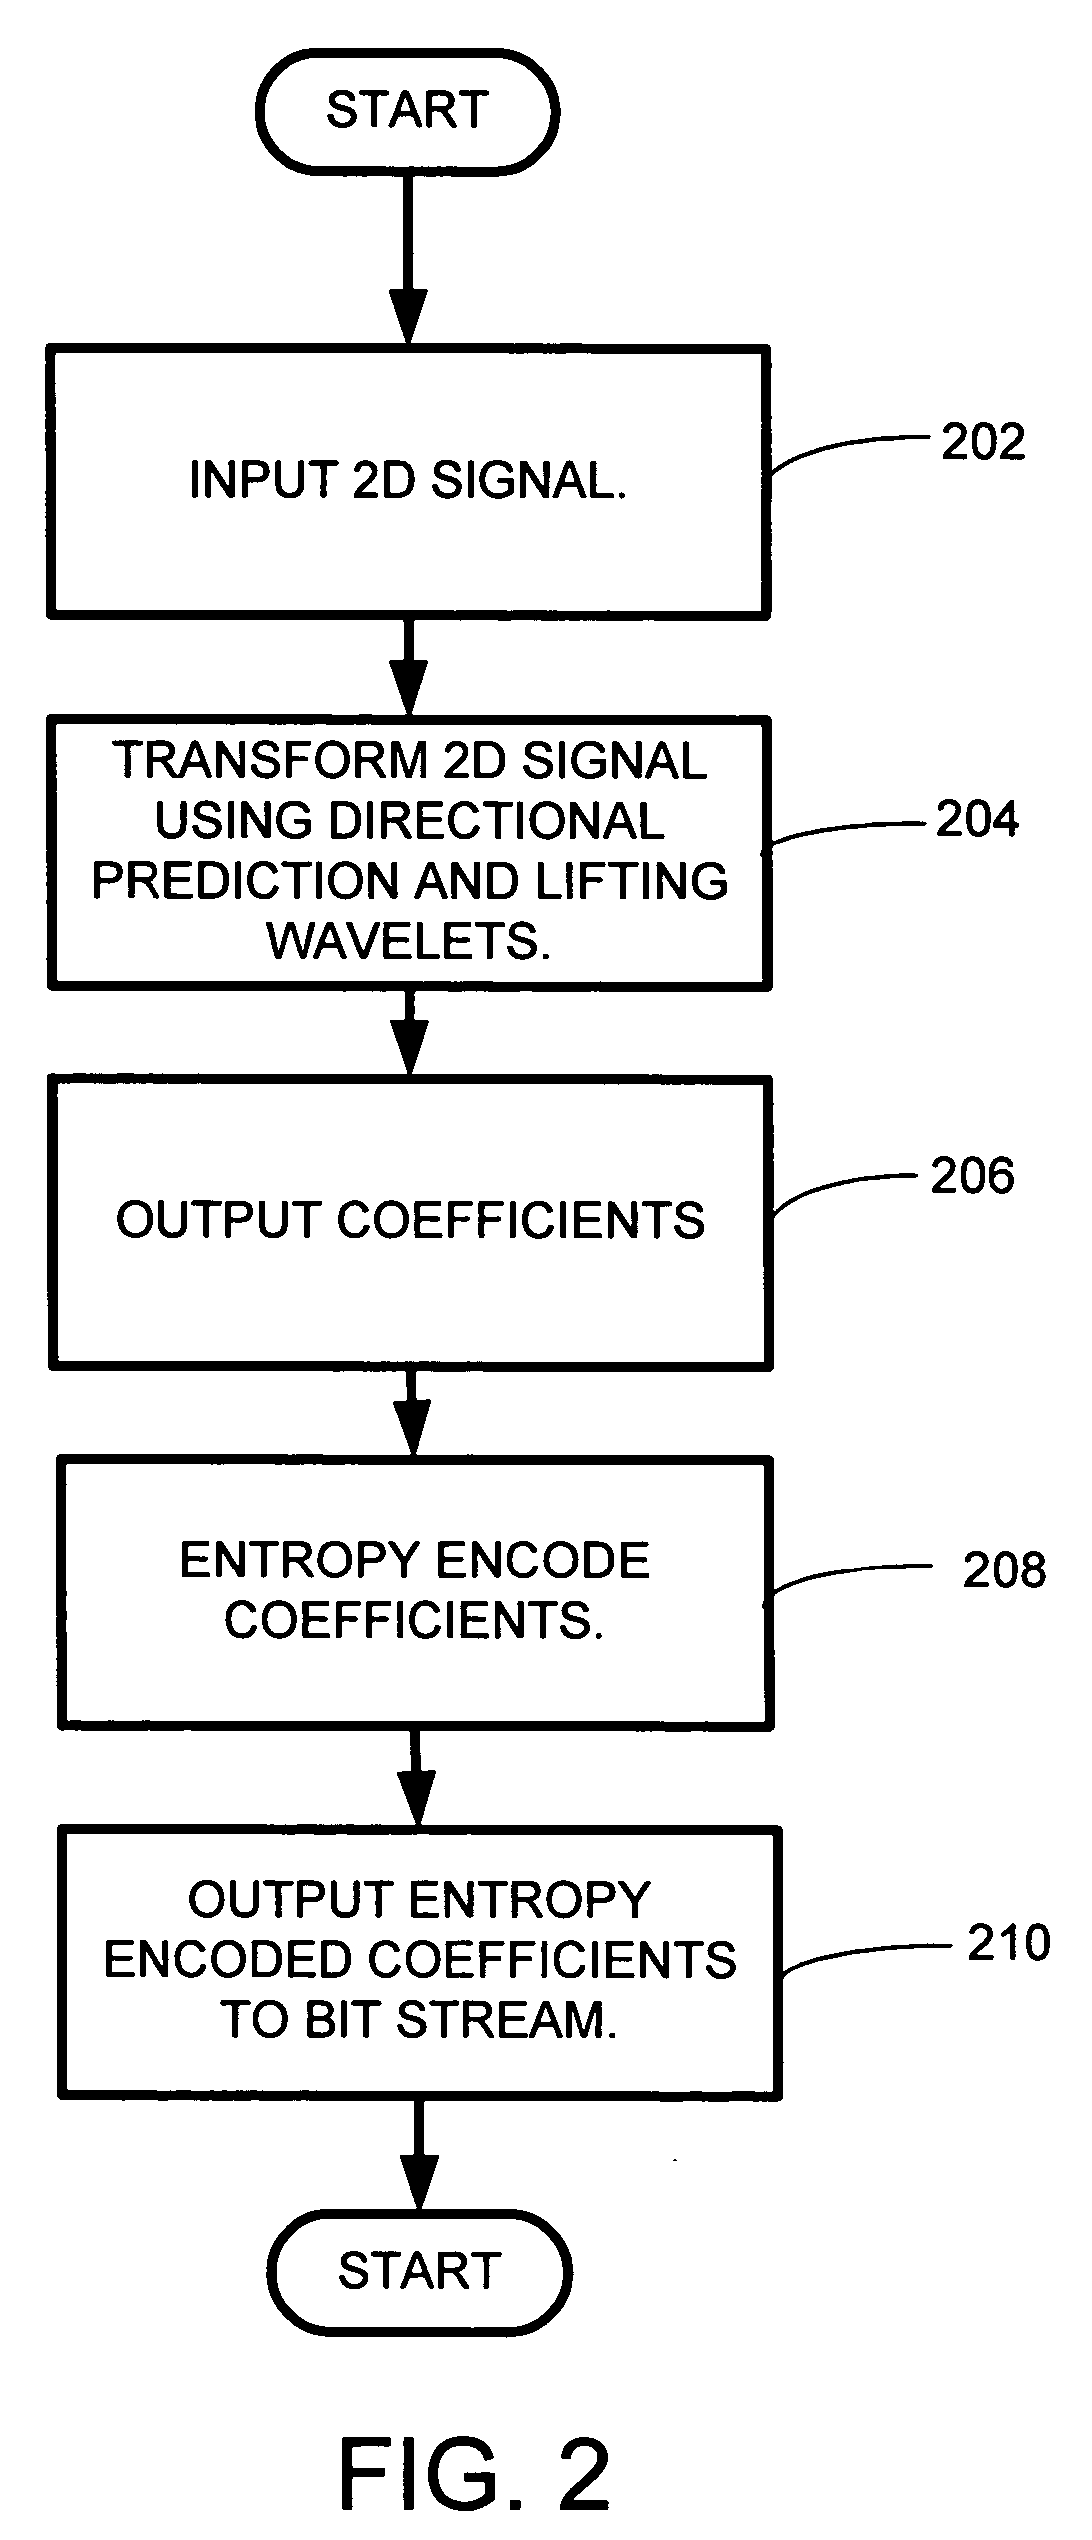 System and method for image coding employing a hybrid directional prediction and wavelet lifting